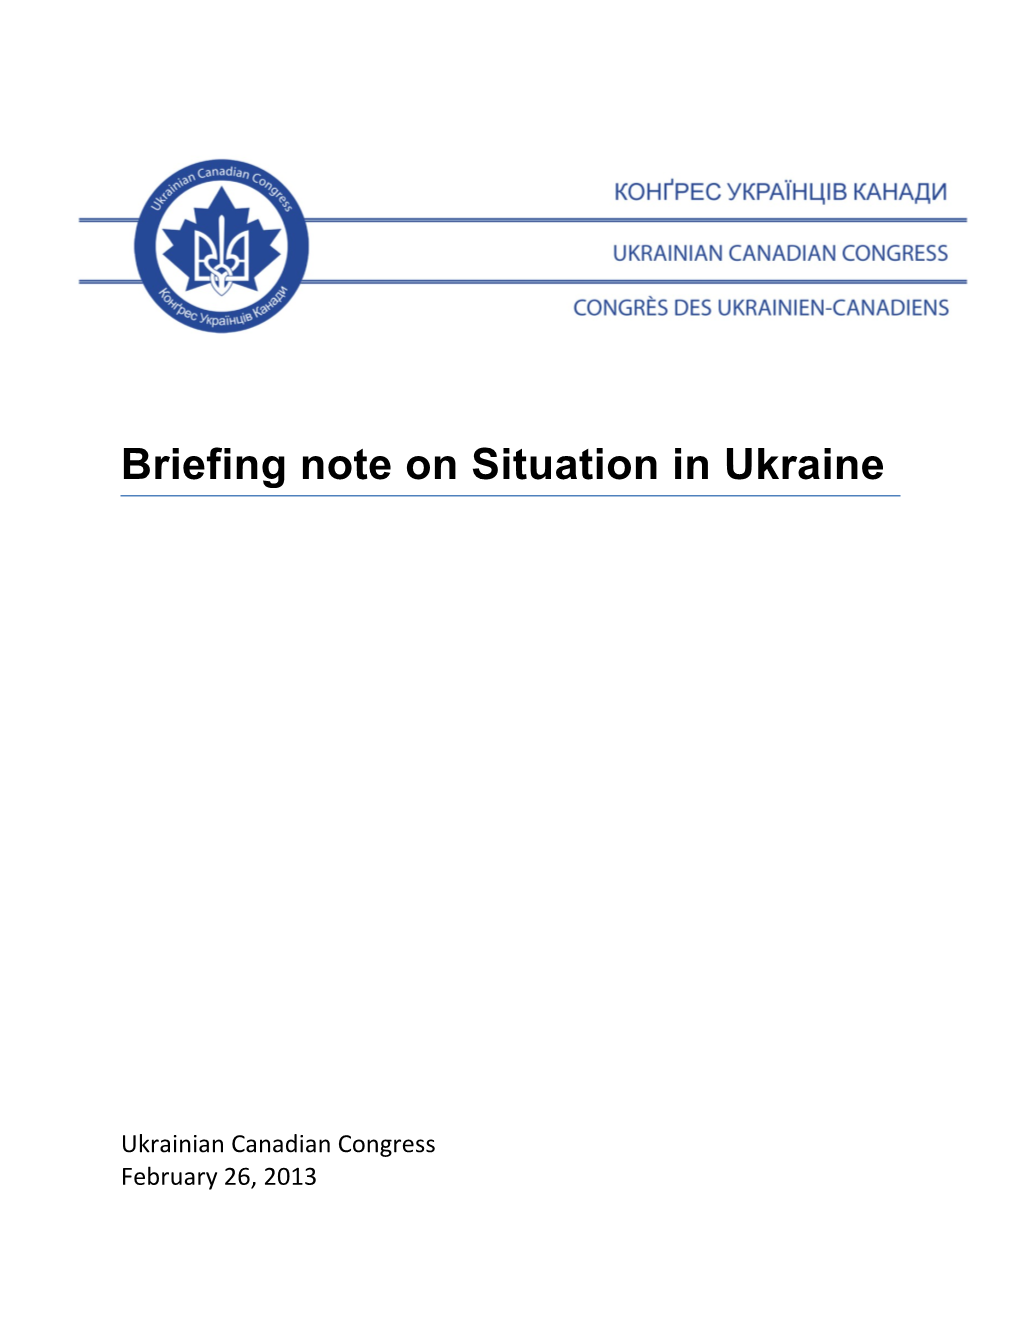 Briefing Note on Situation in Ukraine